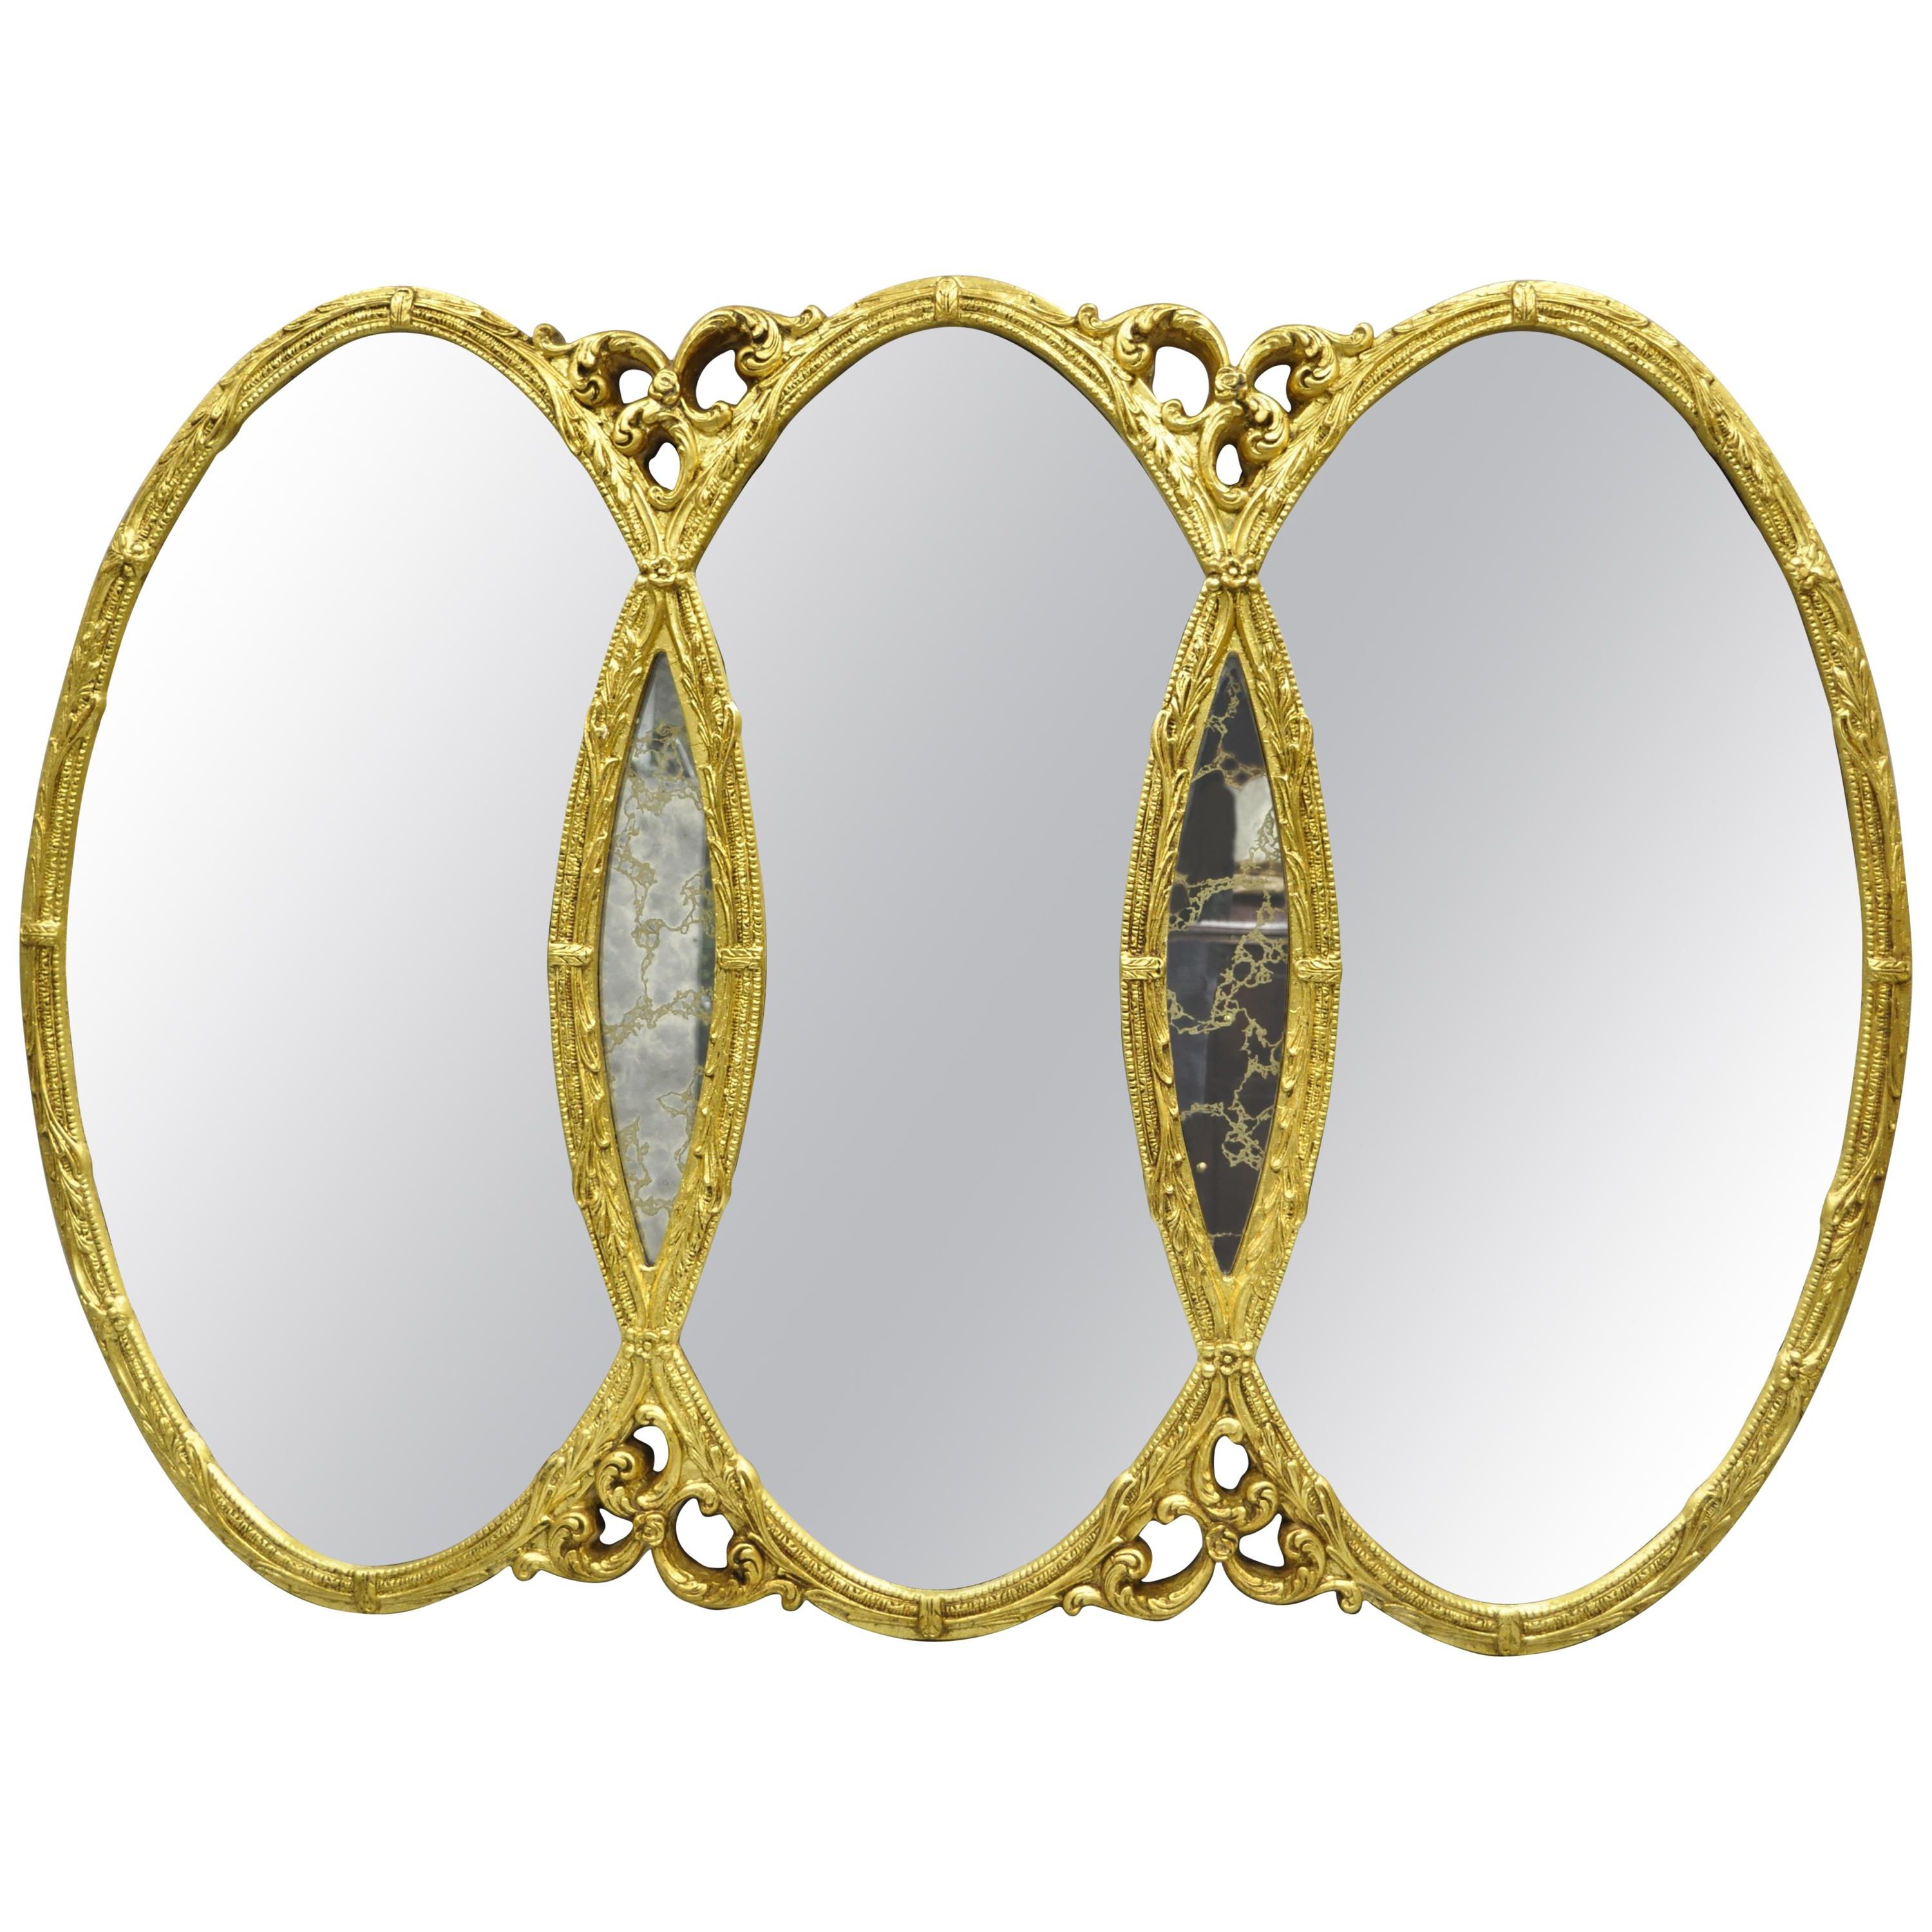 Gold French Hollywood Regency Triptych Triple Interlocking Oval Wall Mirror Throughout Newest Triple Wall Mirrors (View 12 of 20)